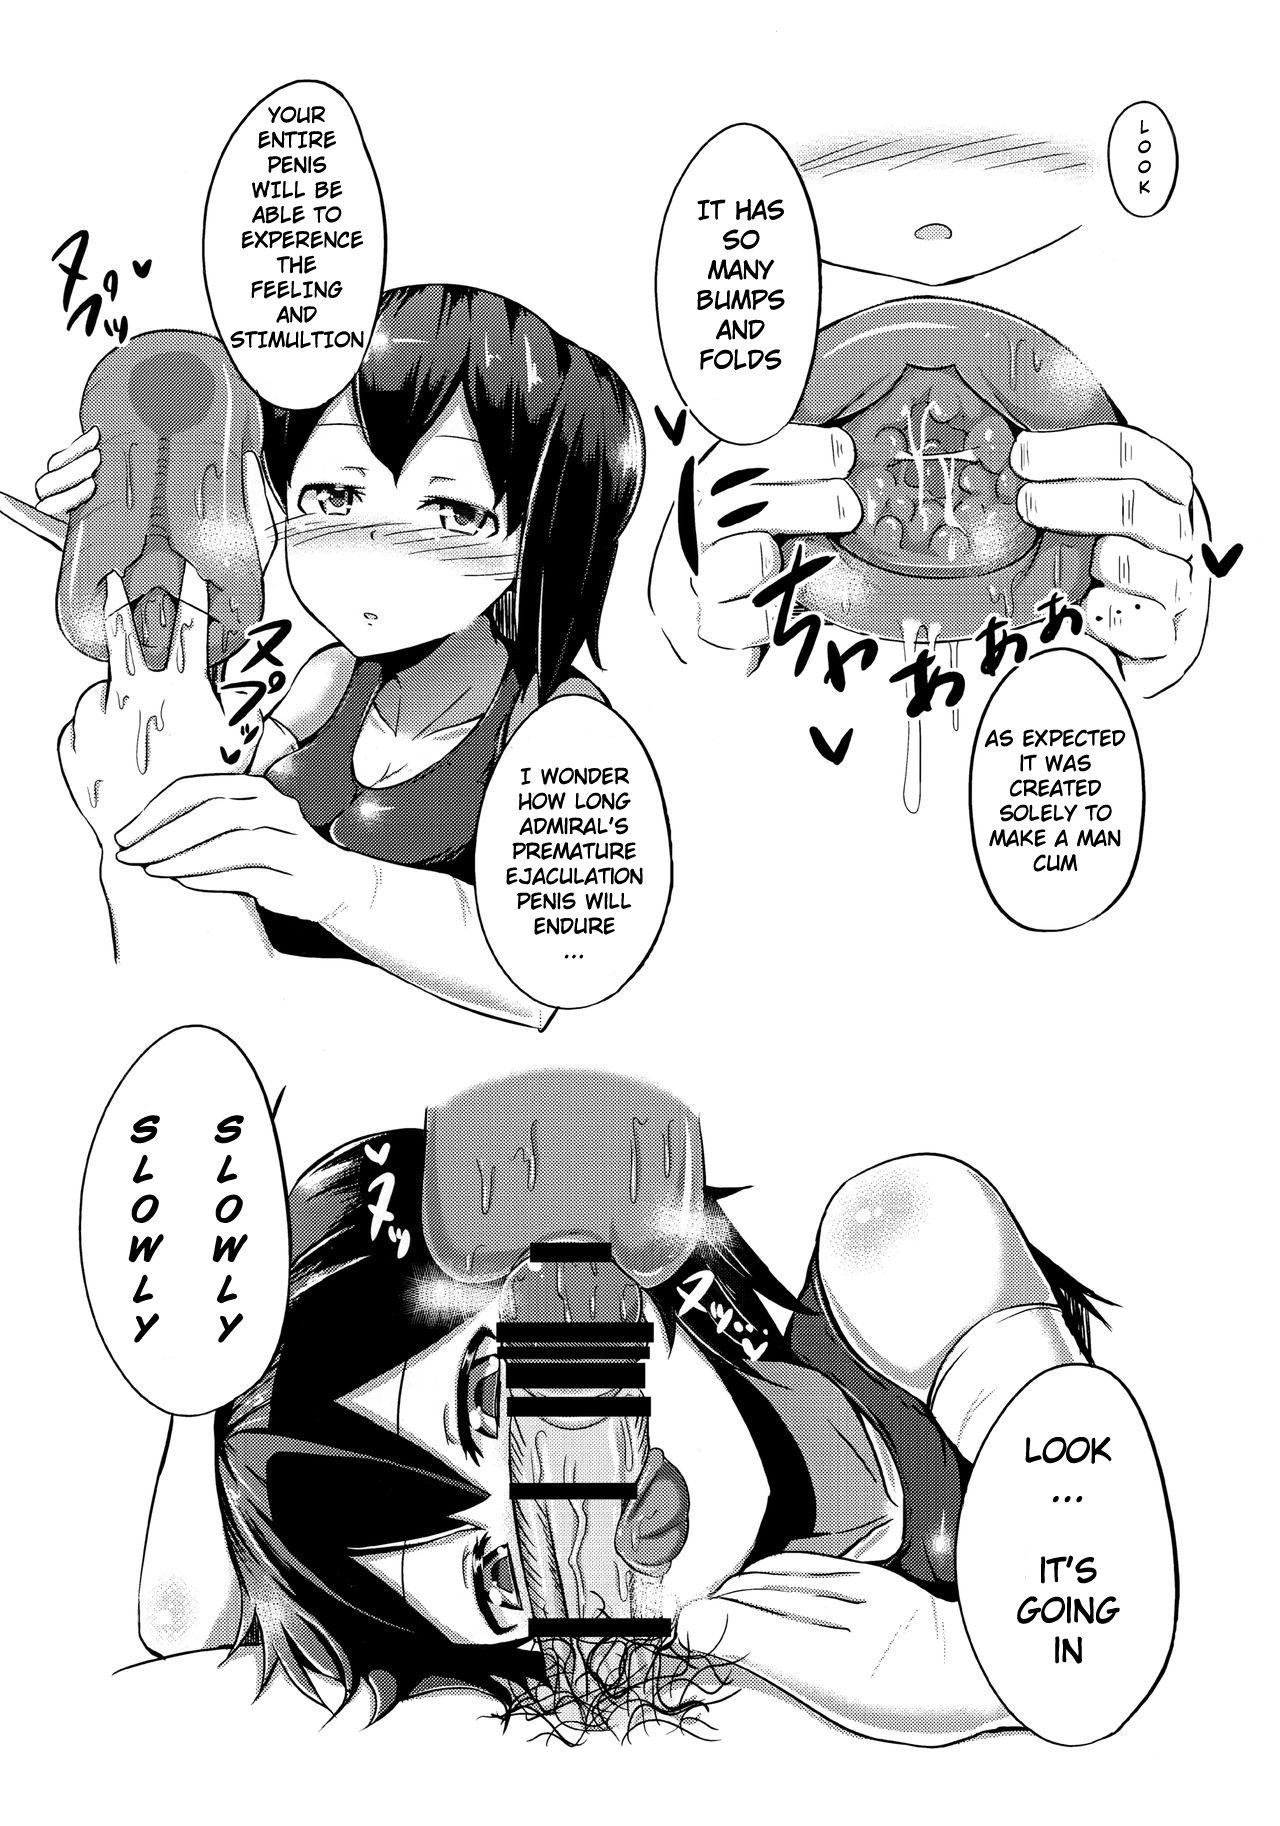 Training For The Benefit of Admiral's Premature Ejaculation with Kaga 1